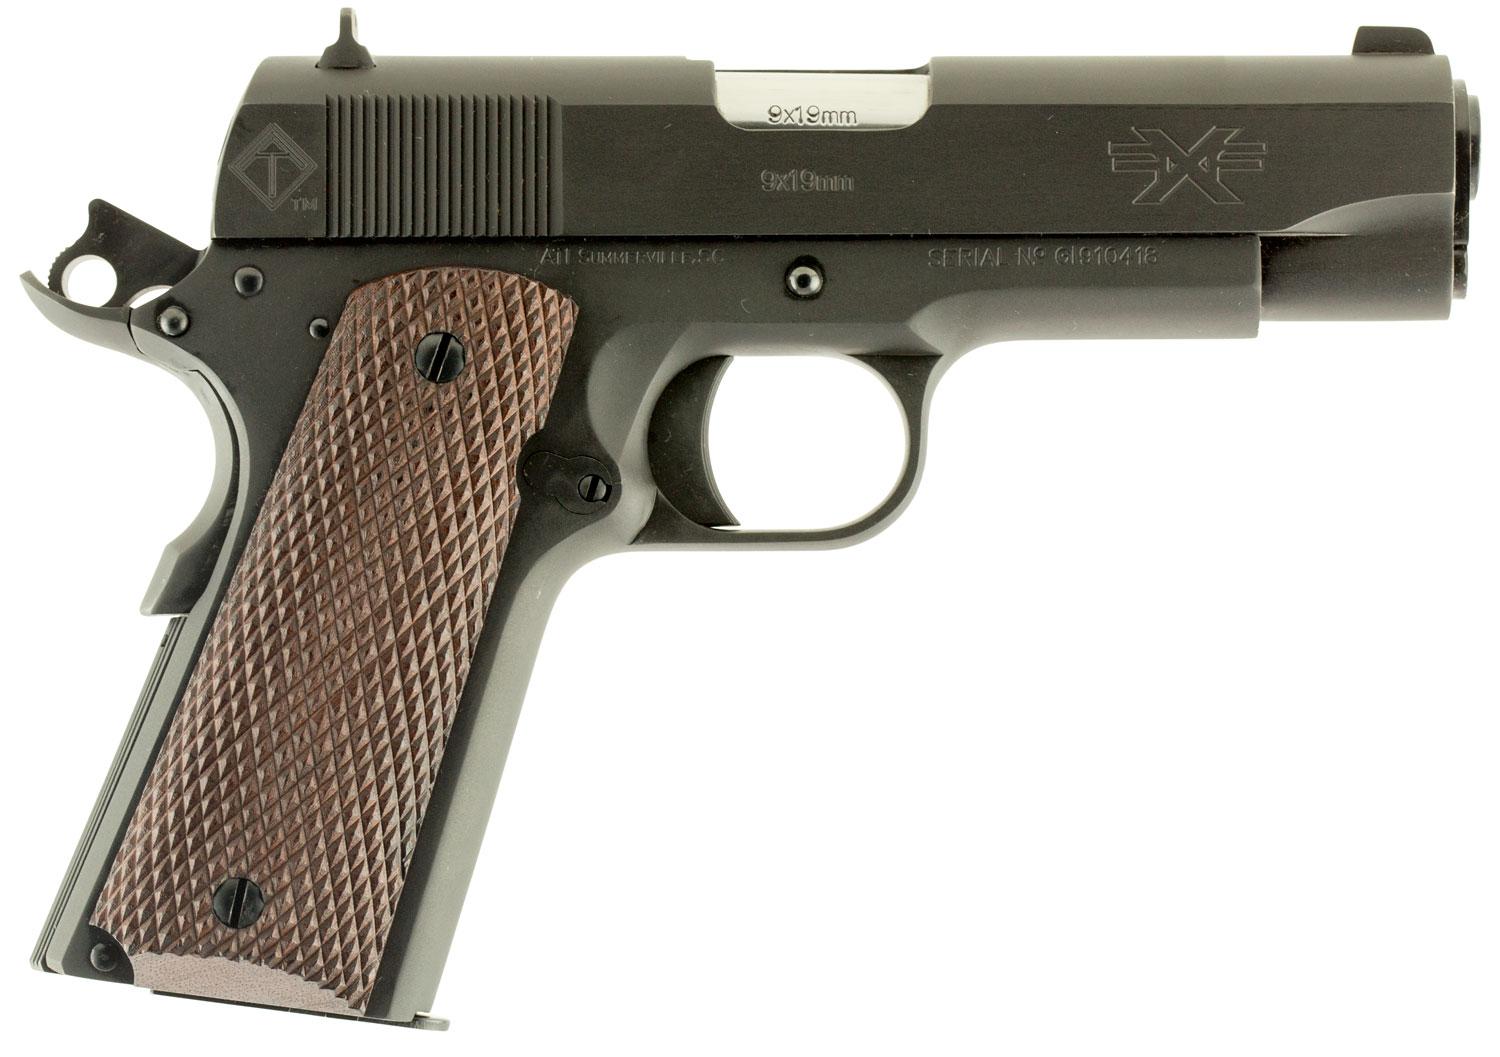 American Tactical Firepower Xtreme 1911 Pistol GFX9GI, 9mm Luger, 4.25", Mahogany Grips, Black Finish, 9 Rd